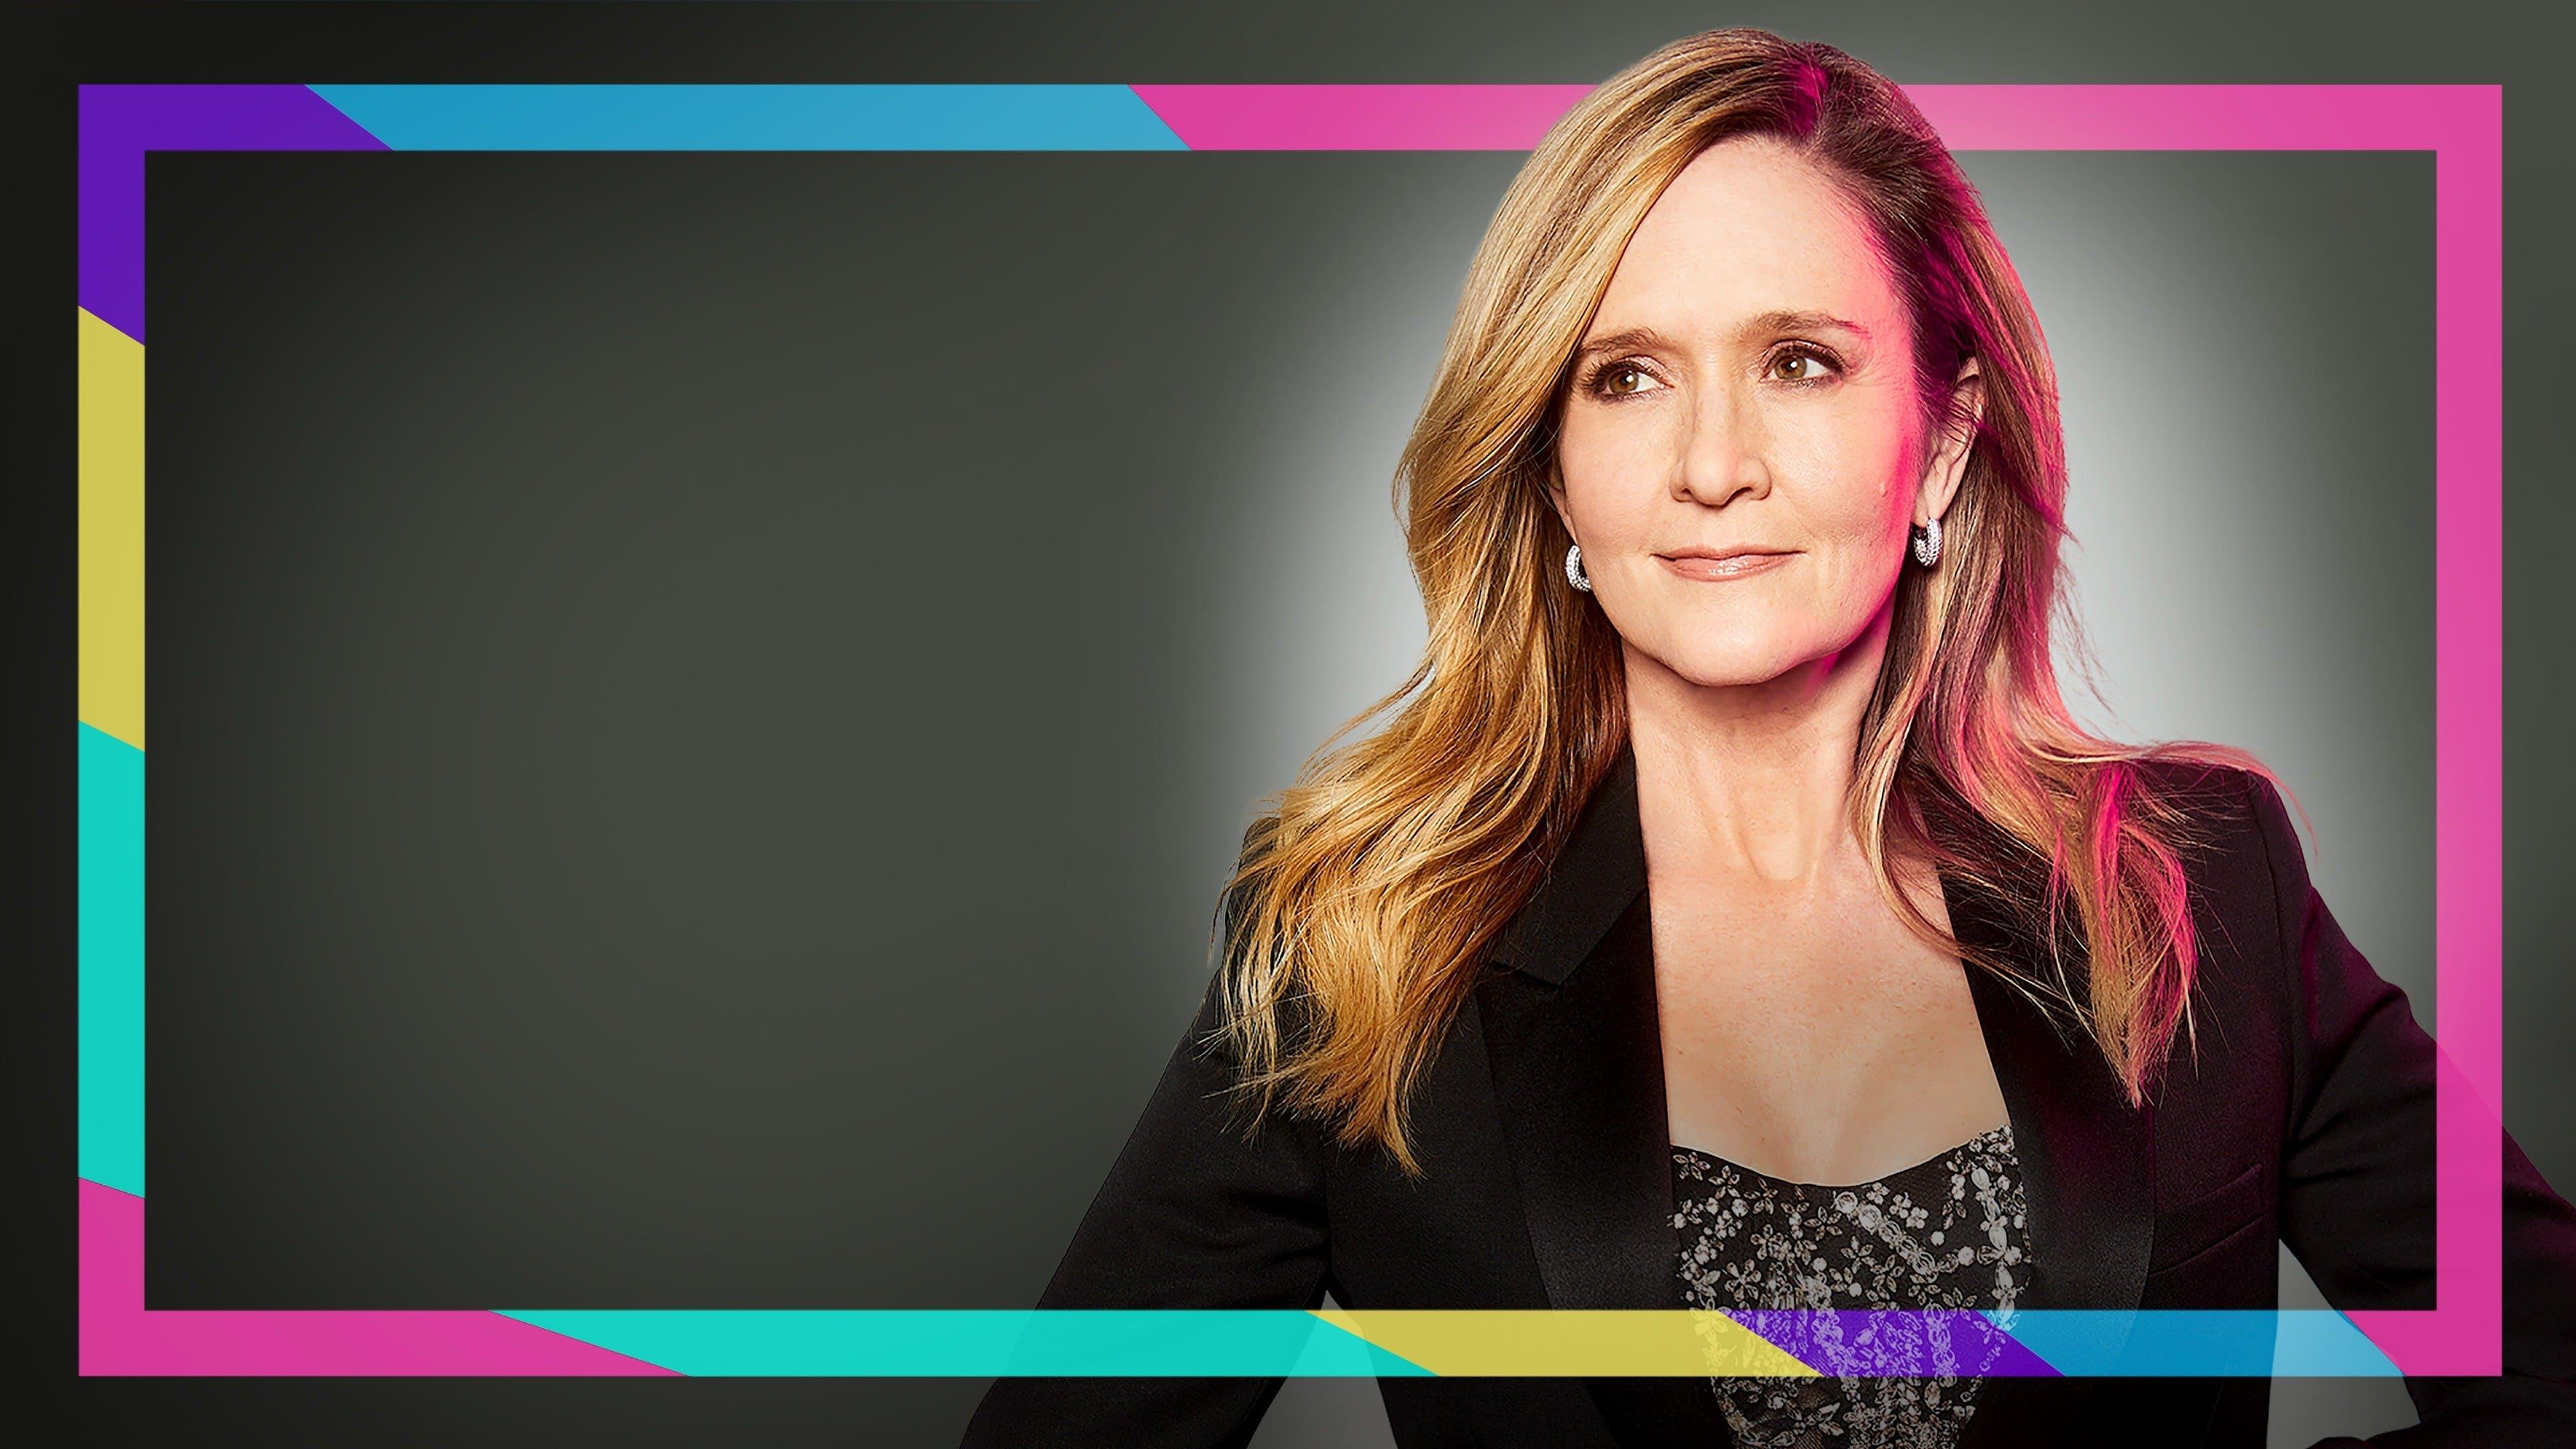 Full Frontal with Samantha Bee backdrop